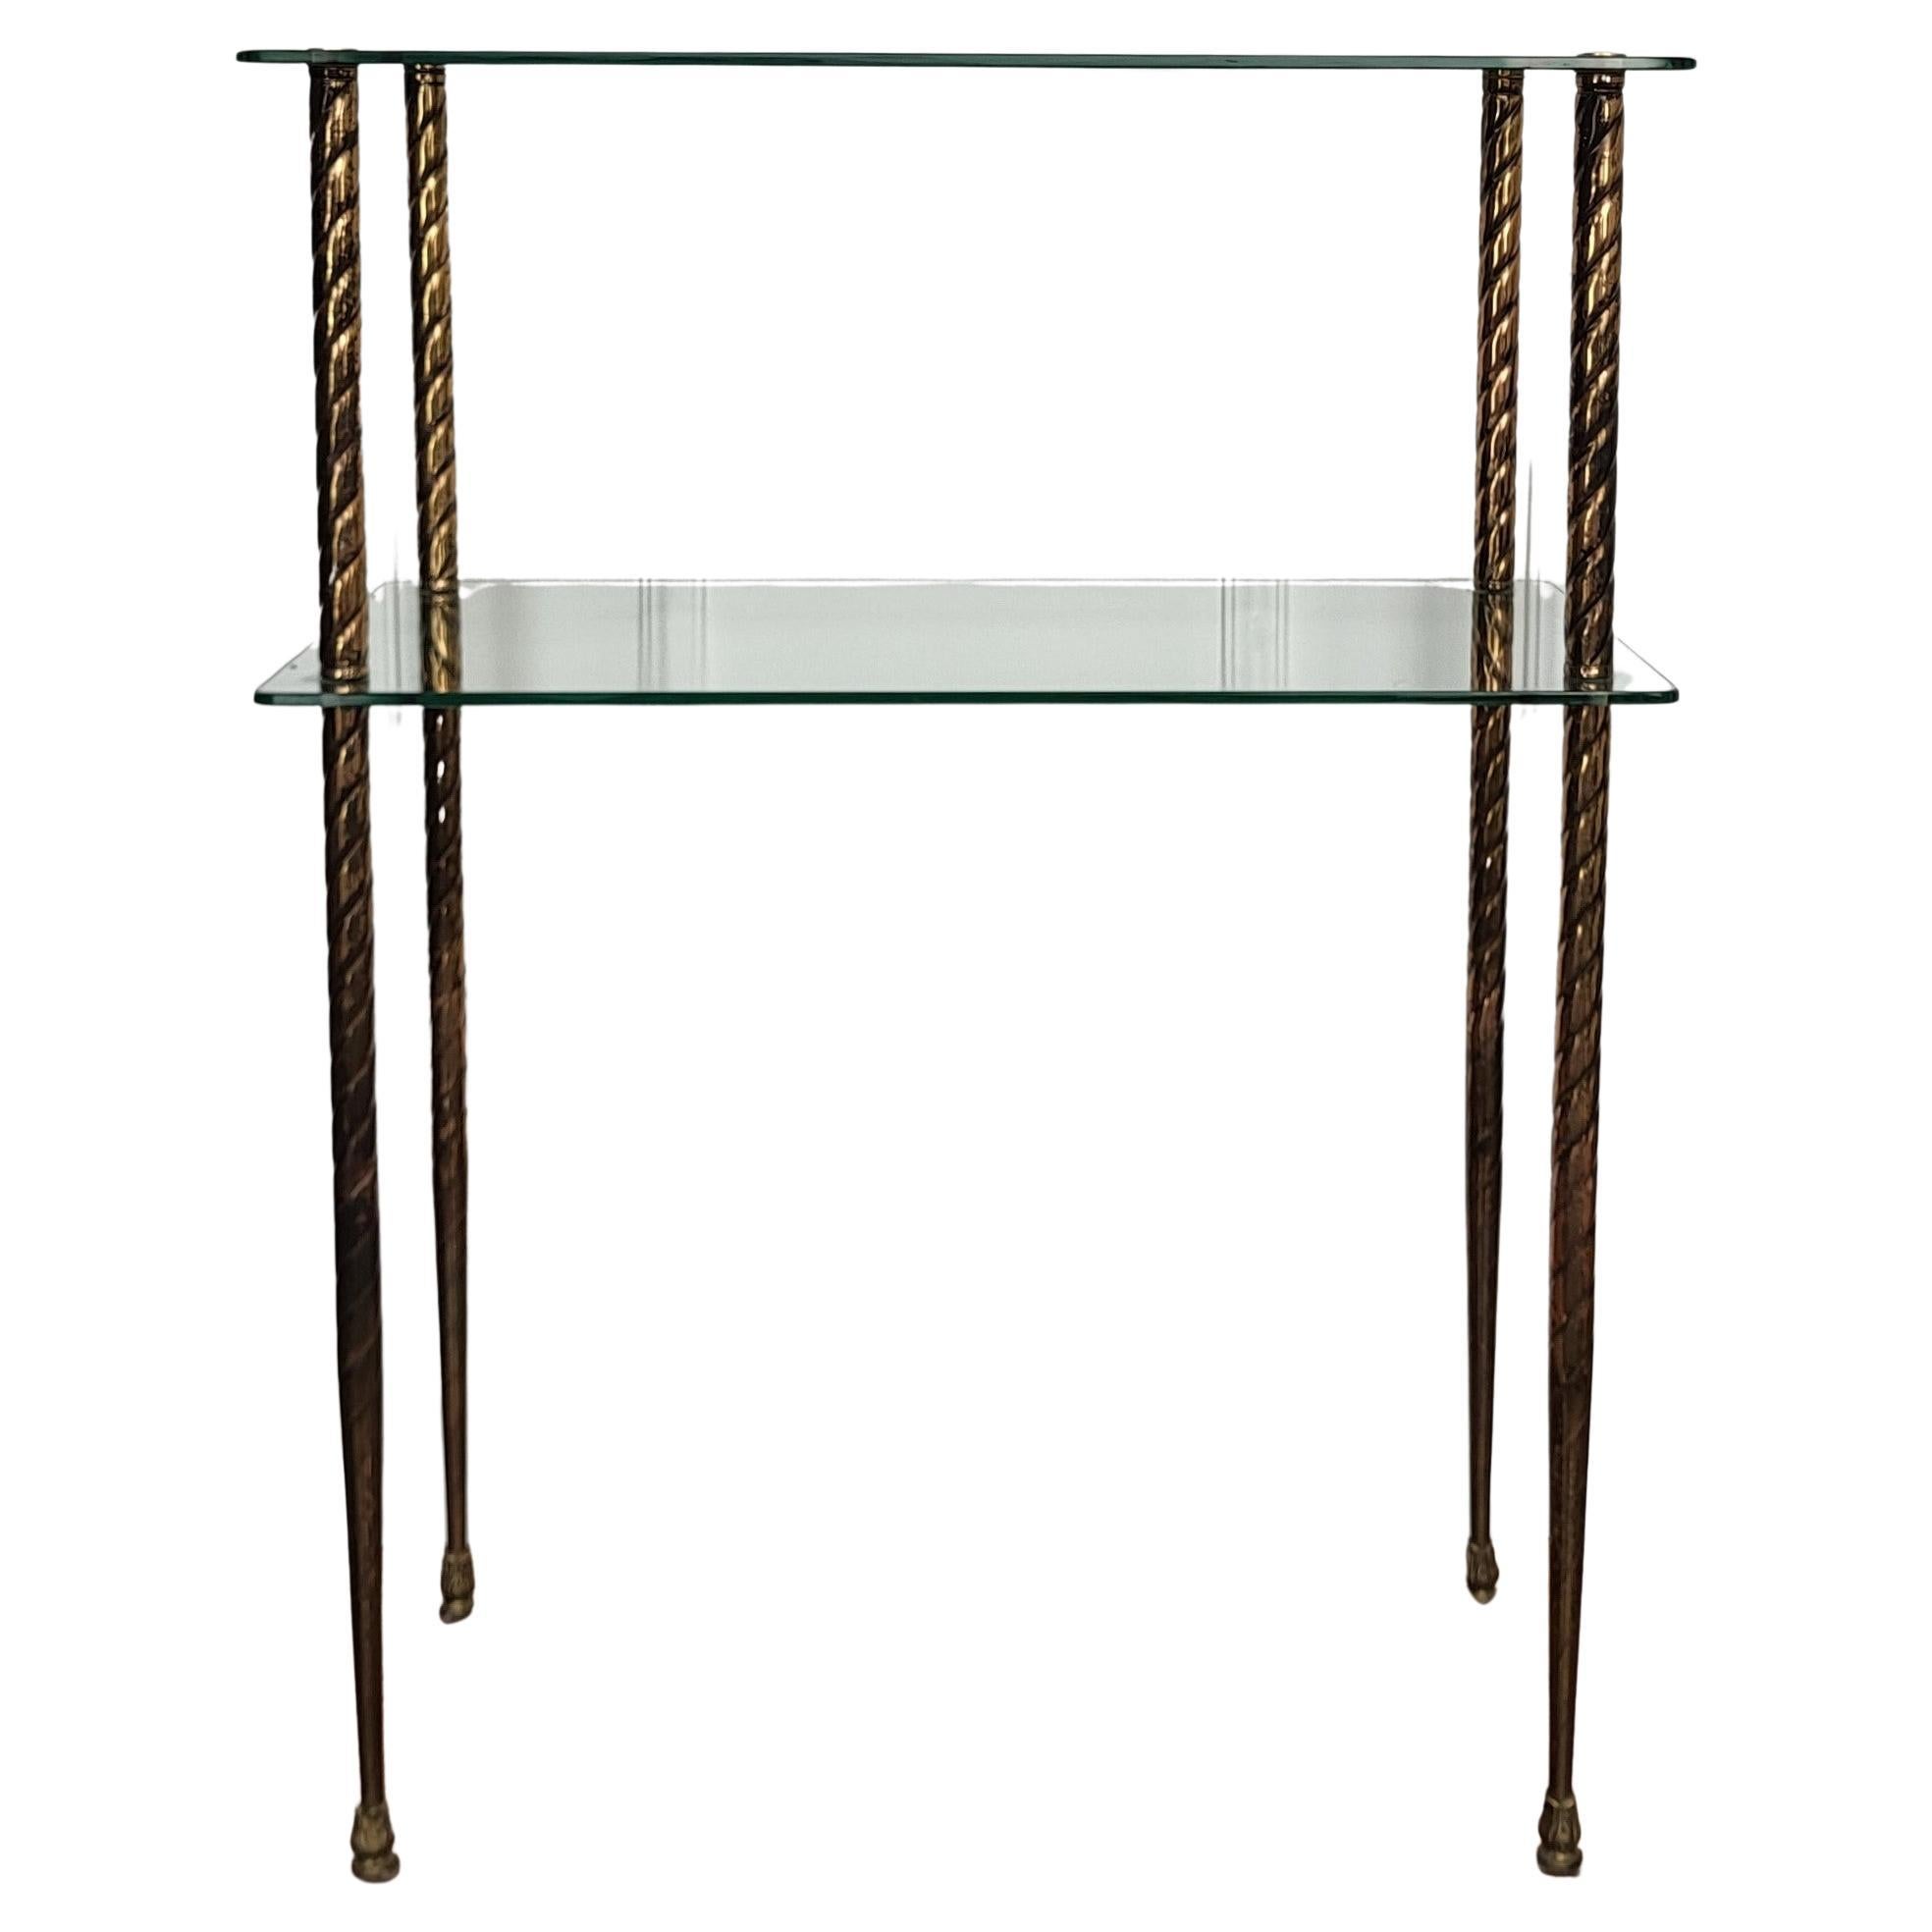 1980 Hollywood Regency Mid-Century Modern Brass Glass Etagere Console Table